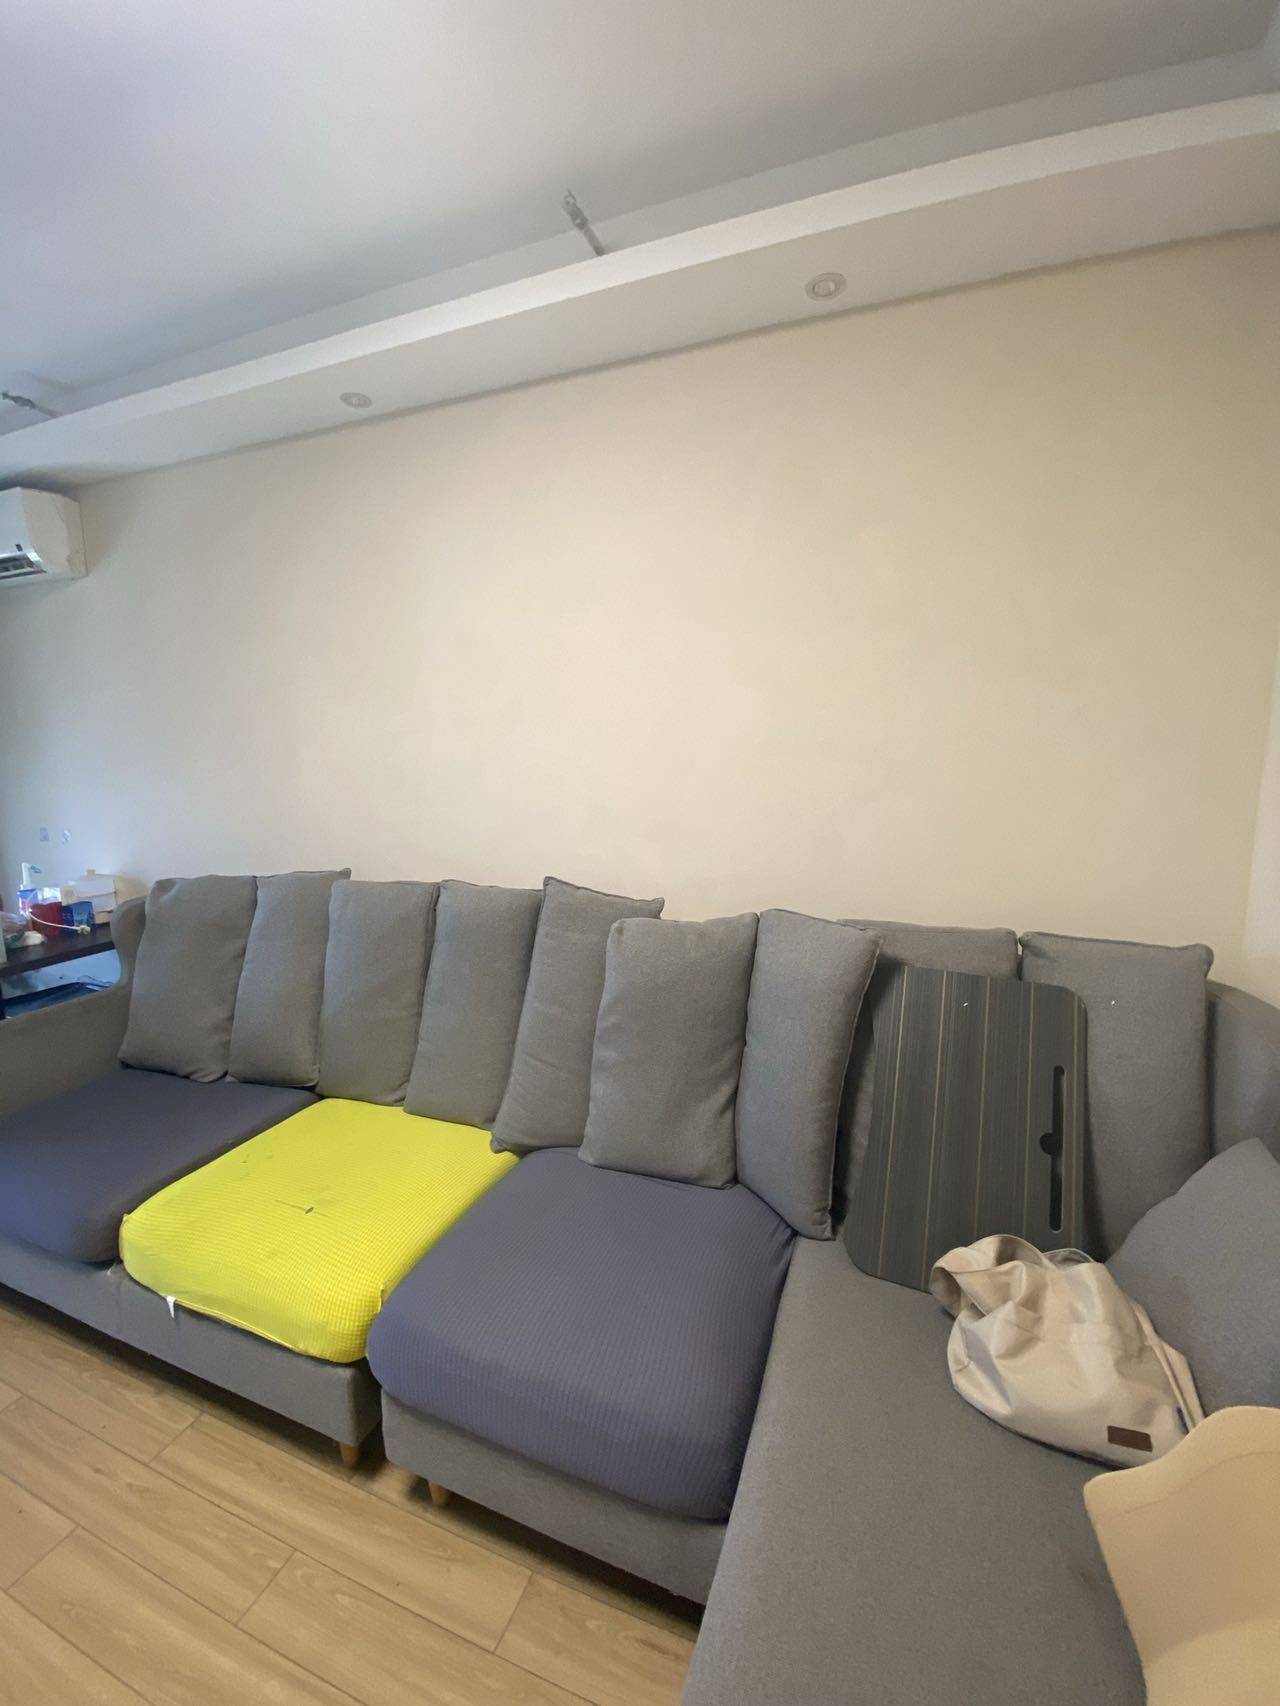 Wuhan-Jiangxia-Cozy Home,Clean&Comfy,No Gender Limit,Chilled